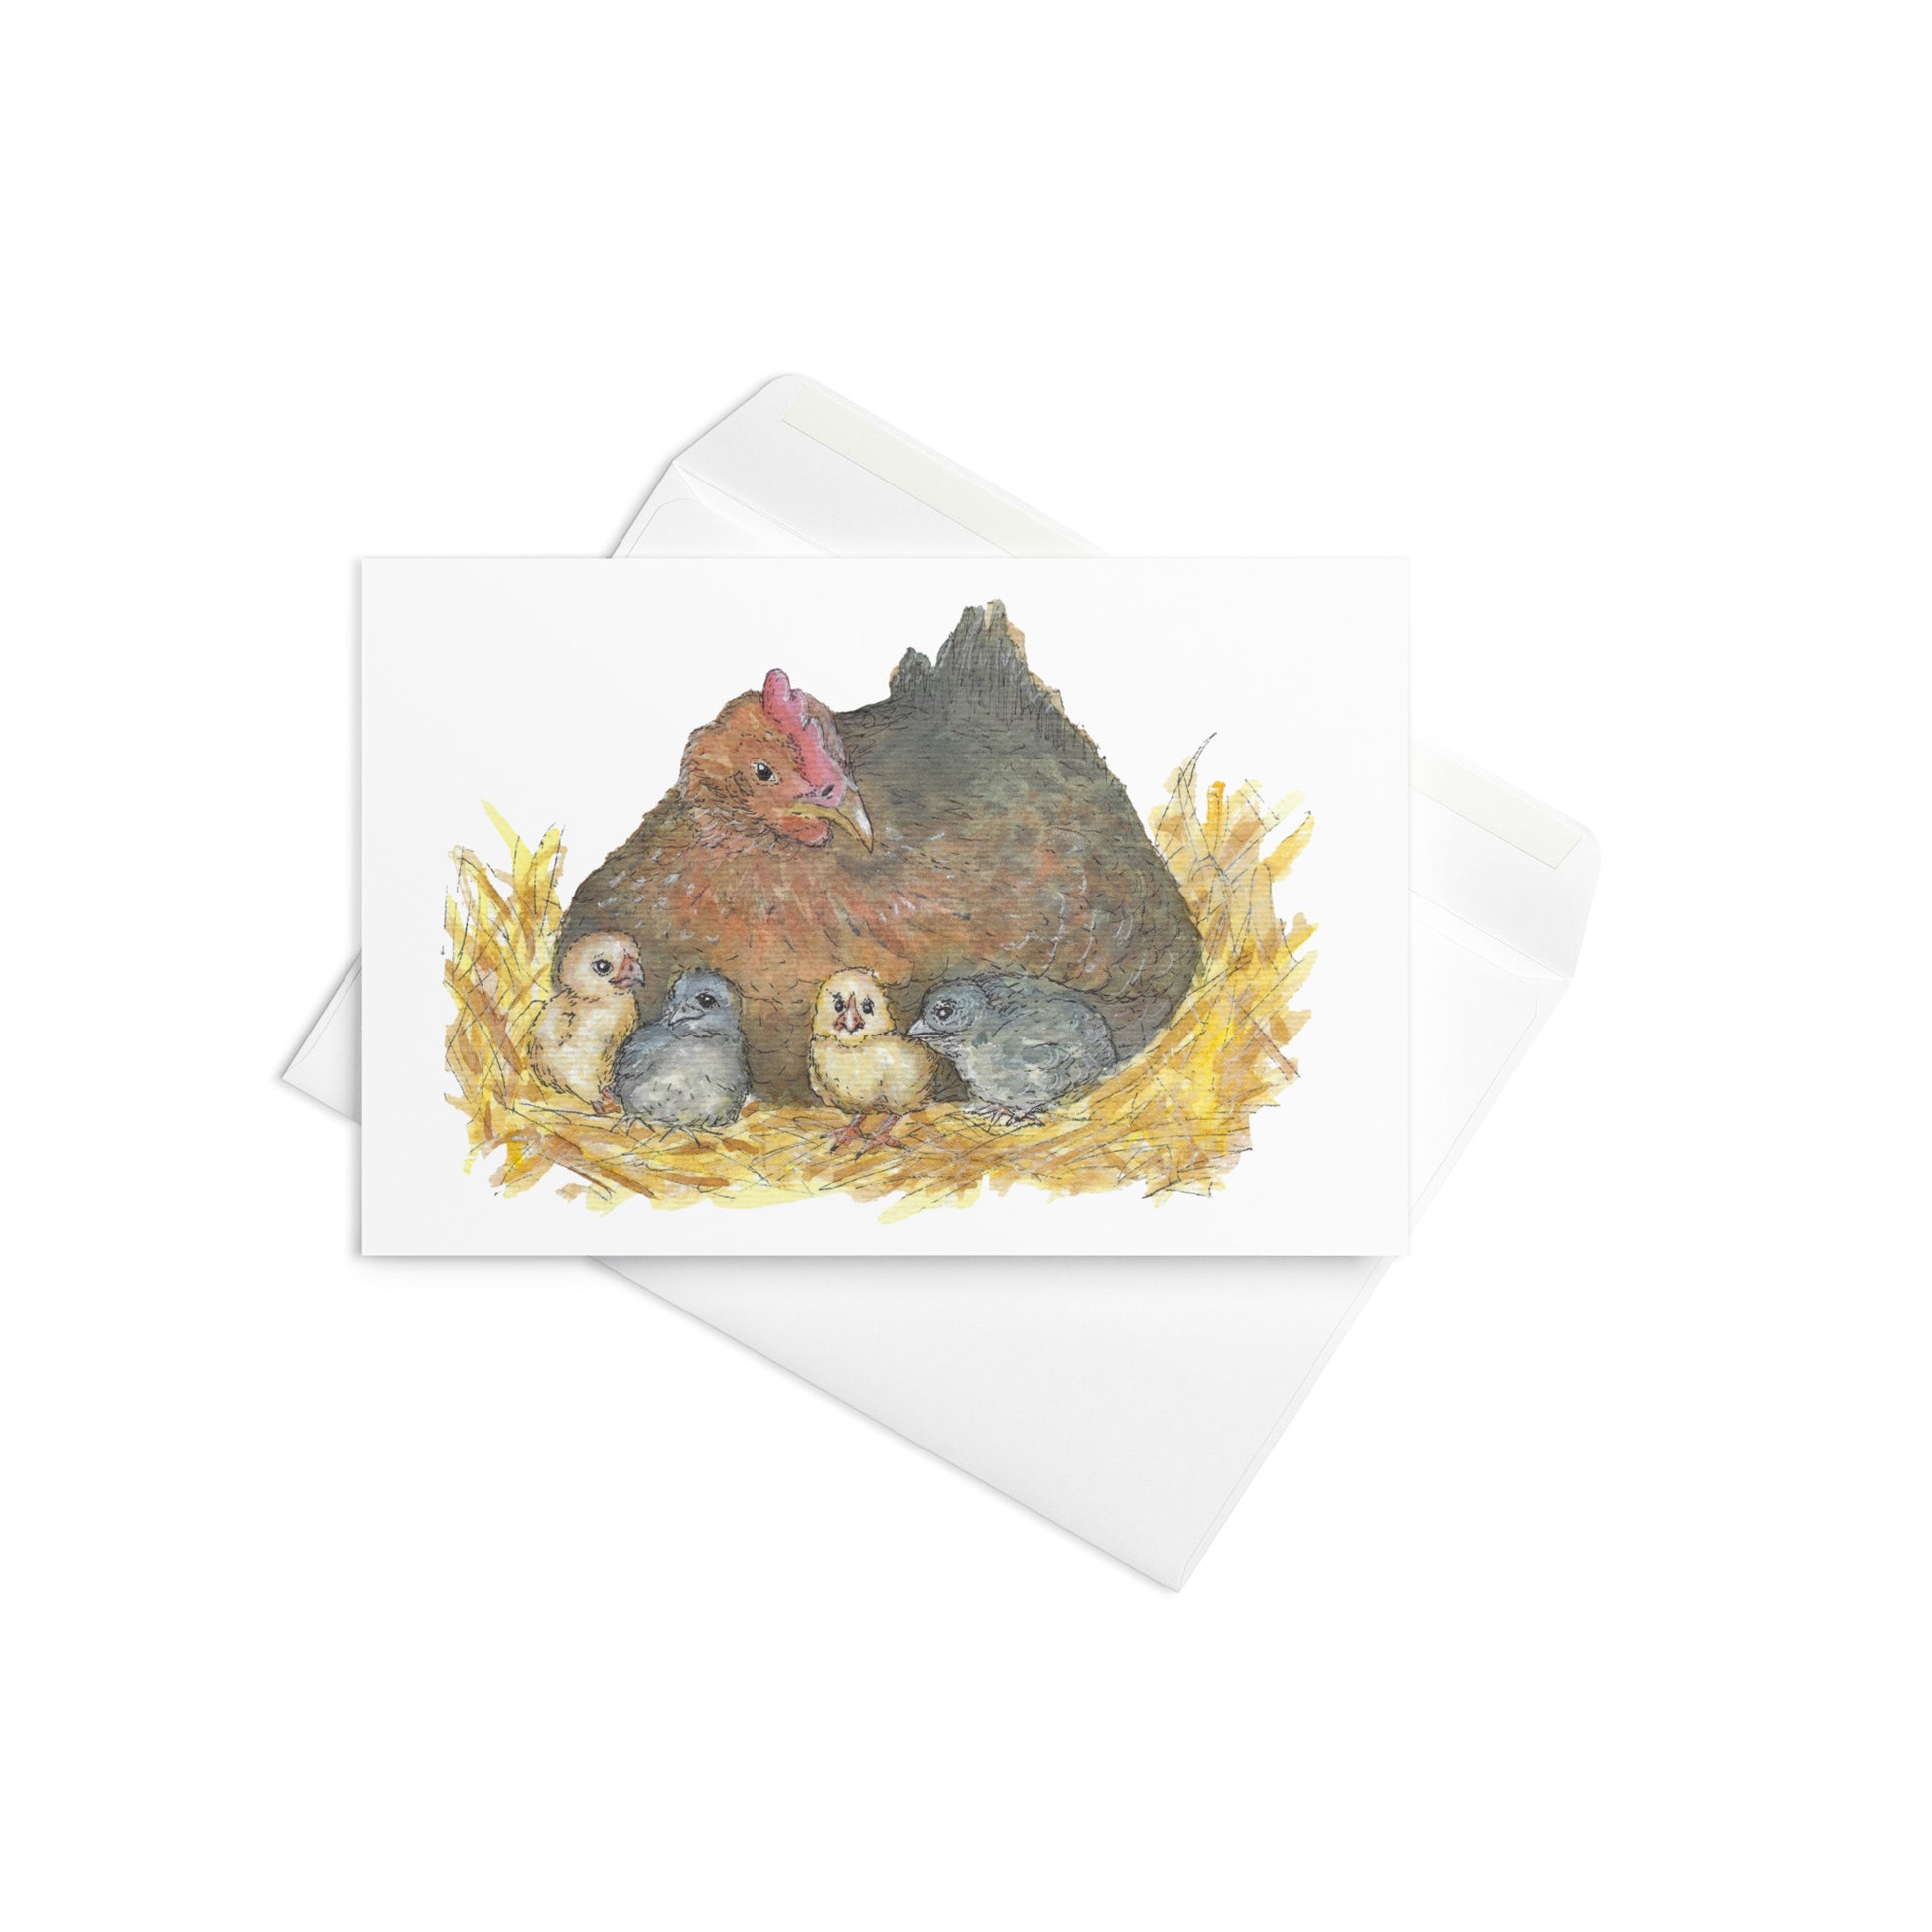 4 by 6 inch greeting card and envelope. Front features watercolor print of a mother hen and four chicks in a nest. Inside is blank.